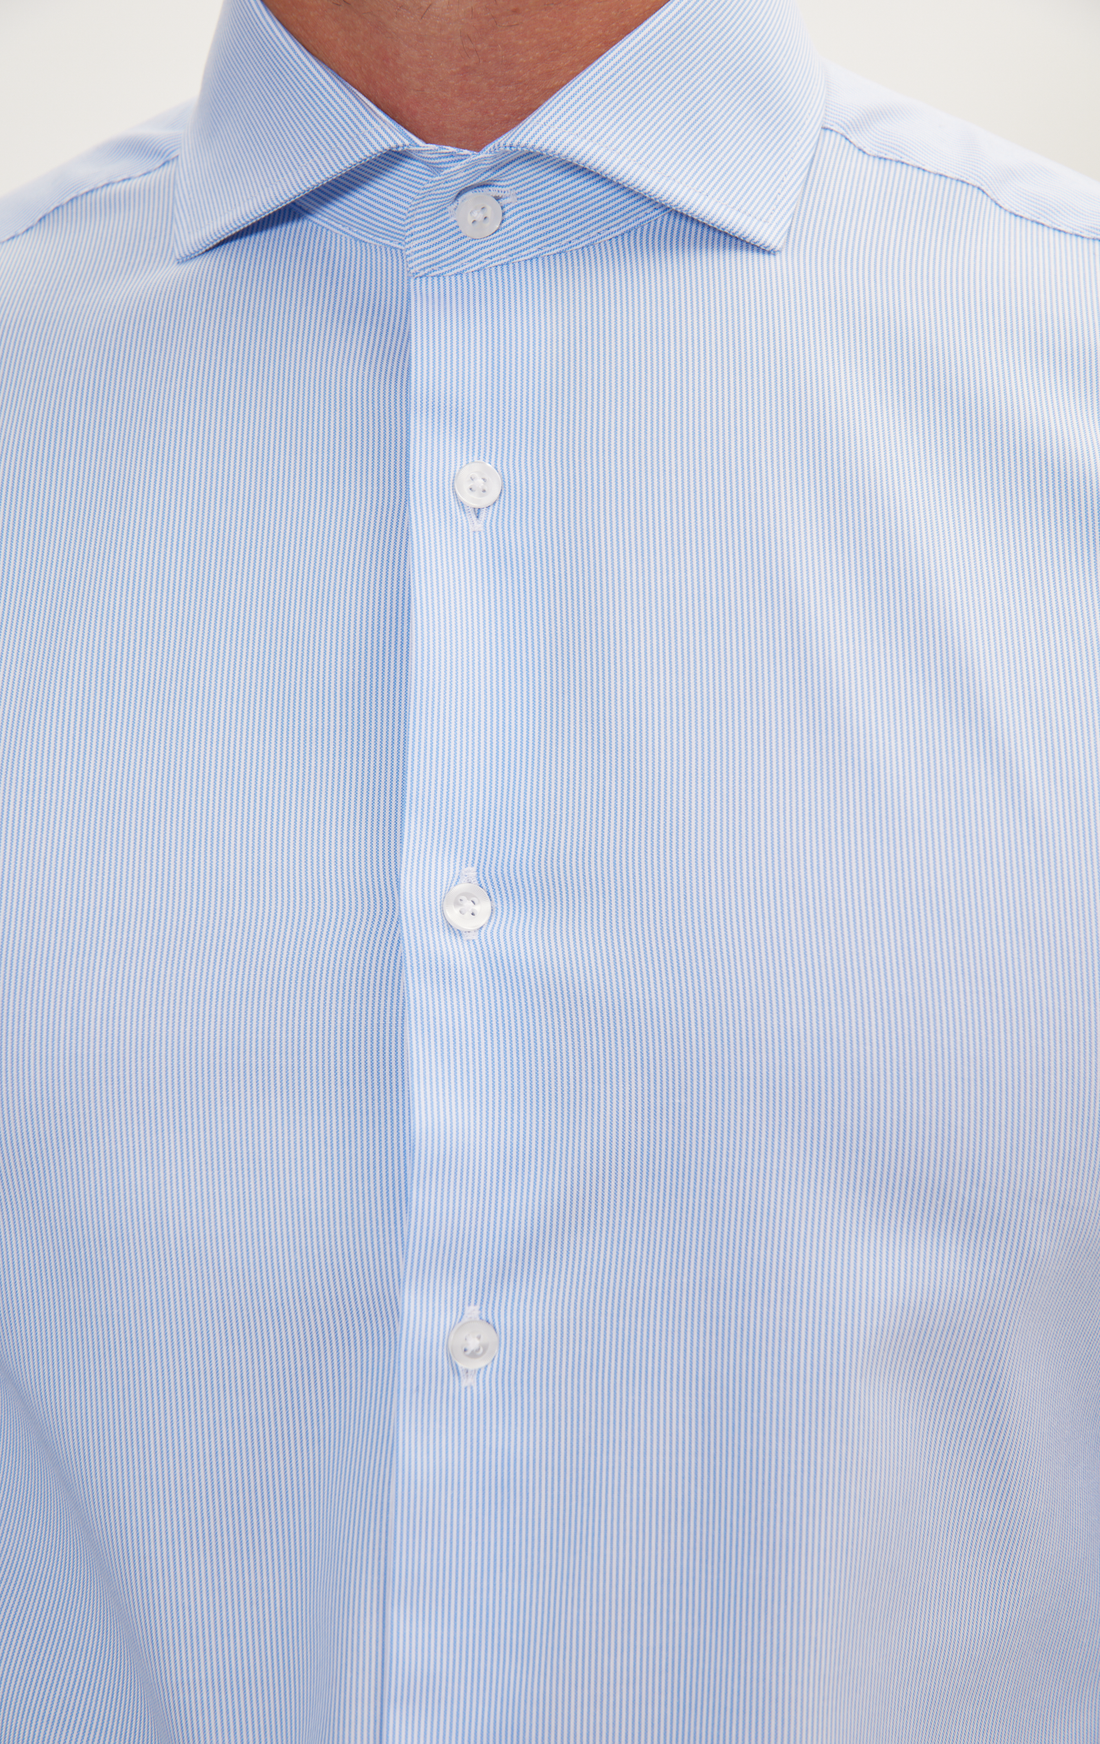 Pure Cotton French Placket Spread Collar Dress Shirt - Blue Striped